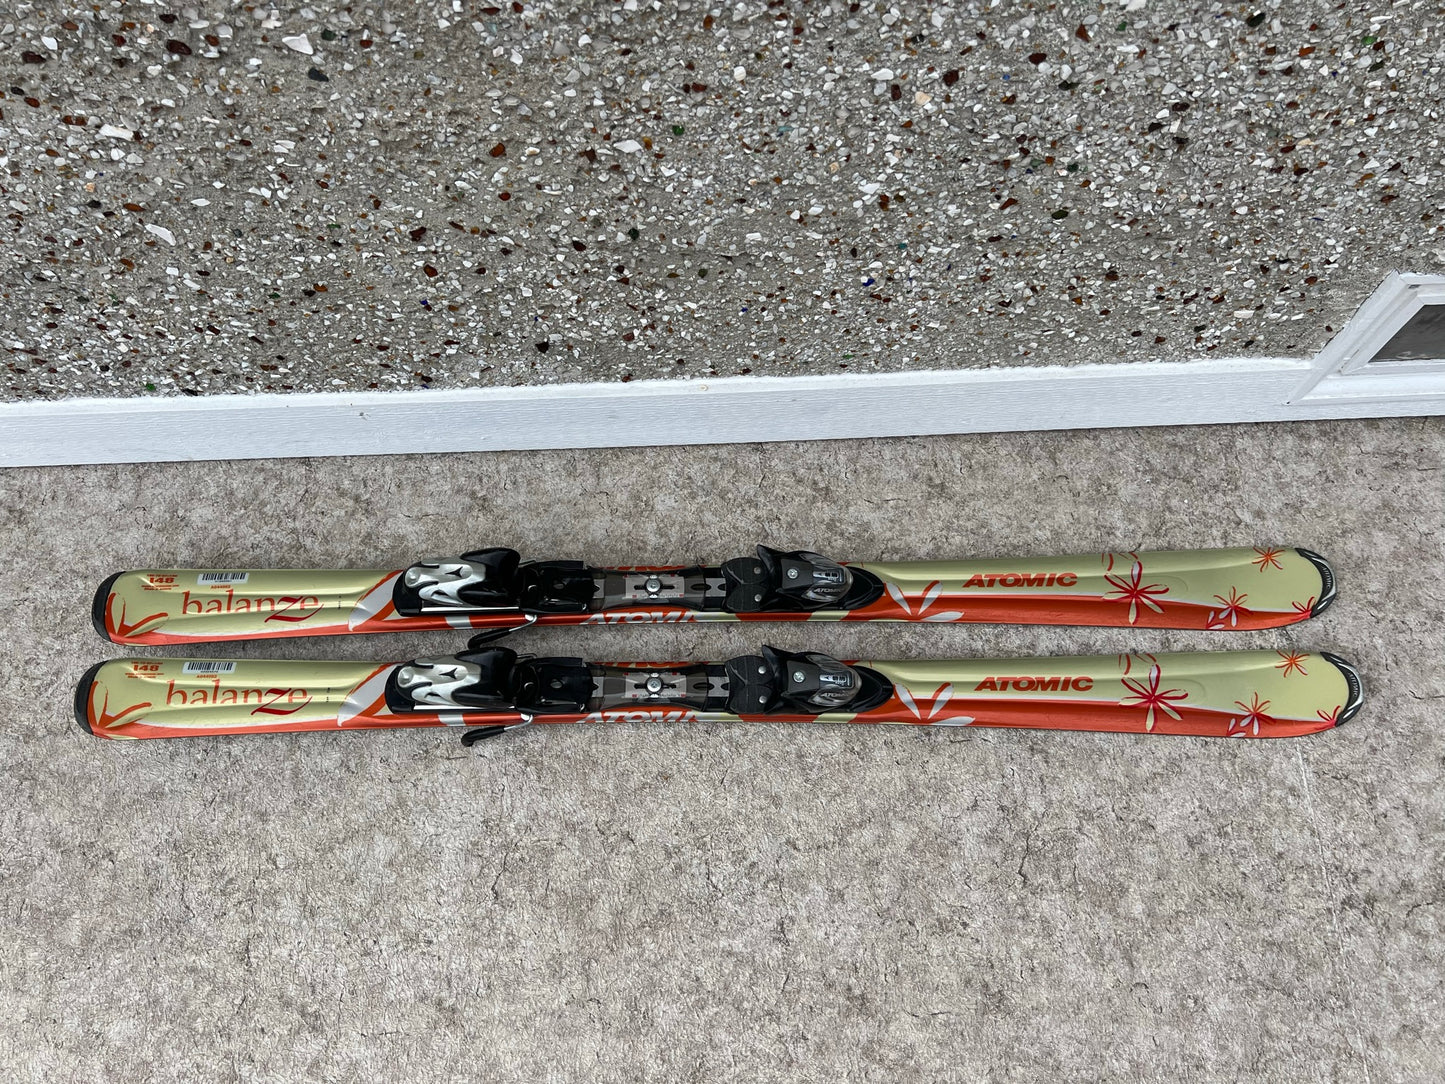 Ski 148 Atomic Balanze Peach Gold Parabolic With Bindings Excellent